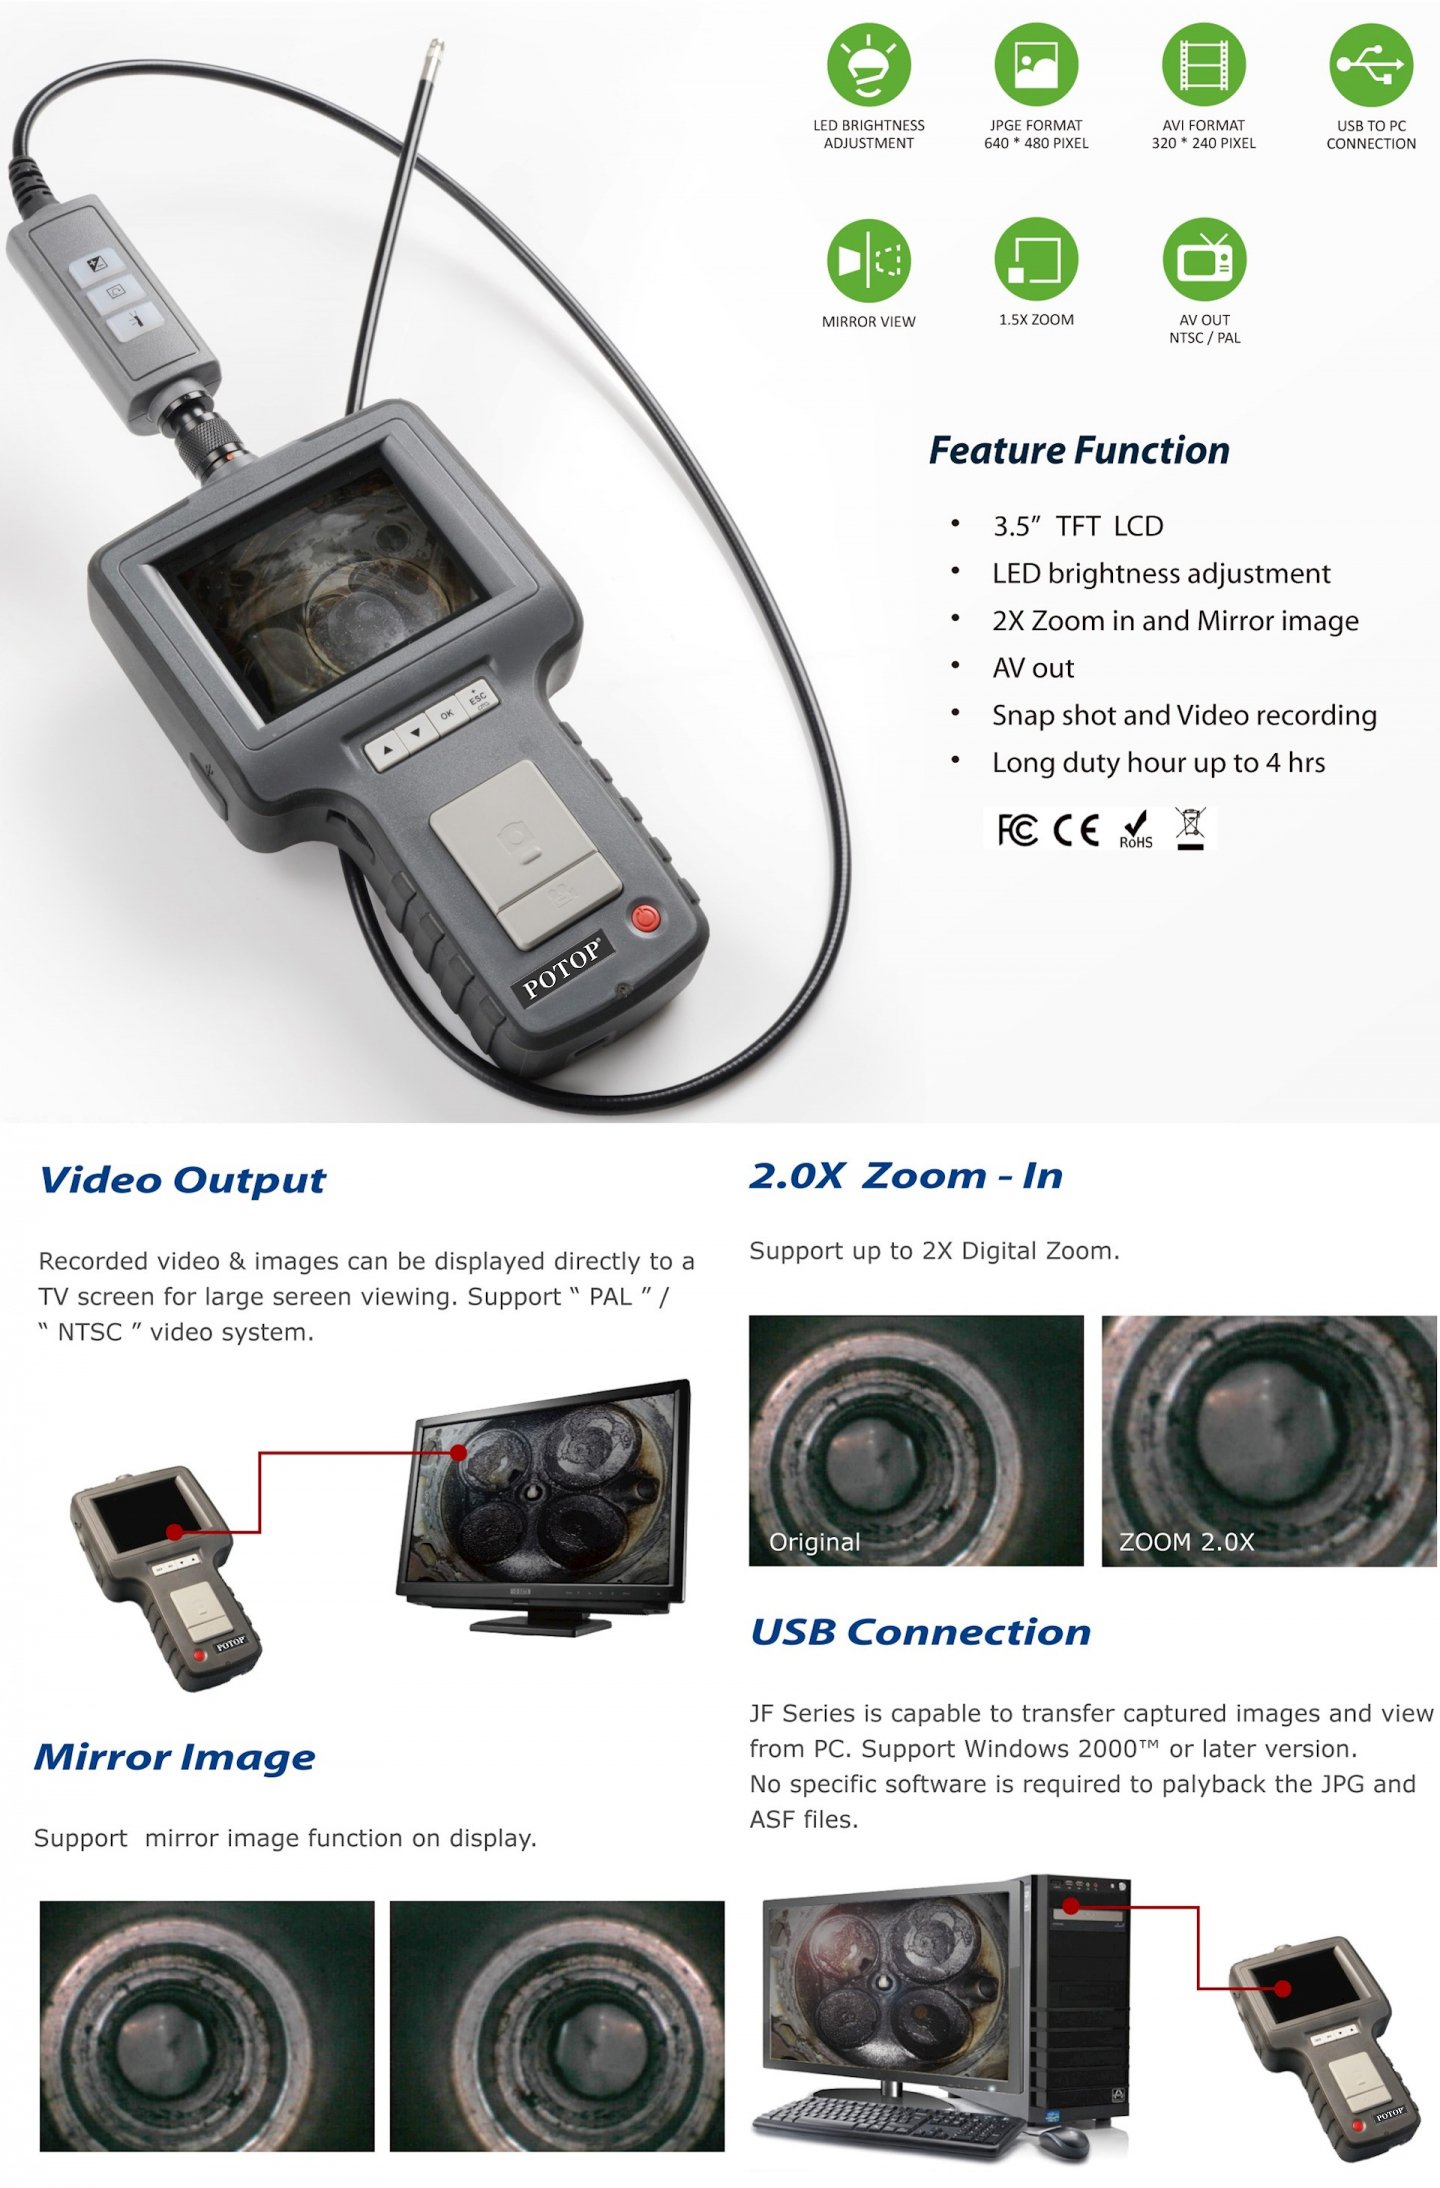 Pipe-borescope-inspection-camera-jf-series-35